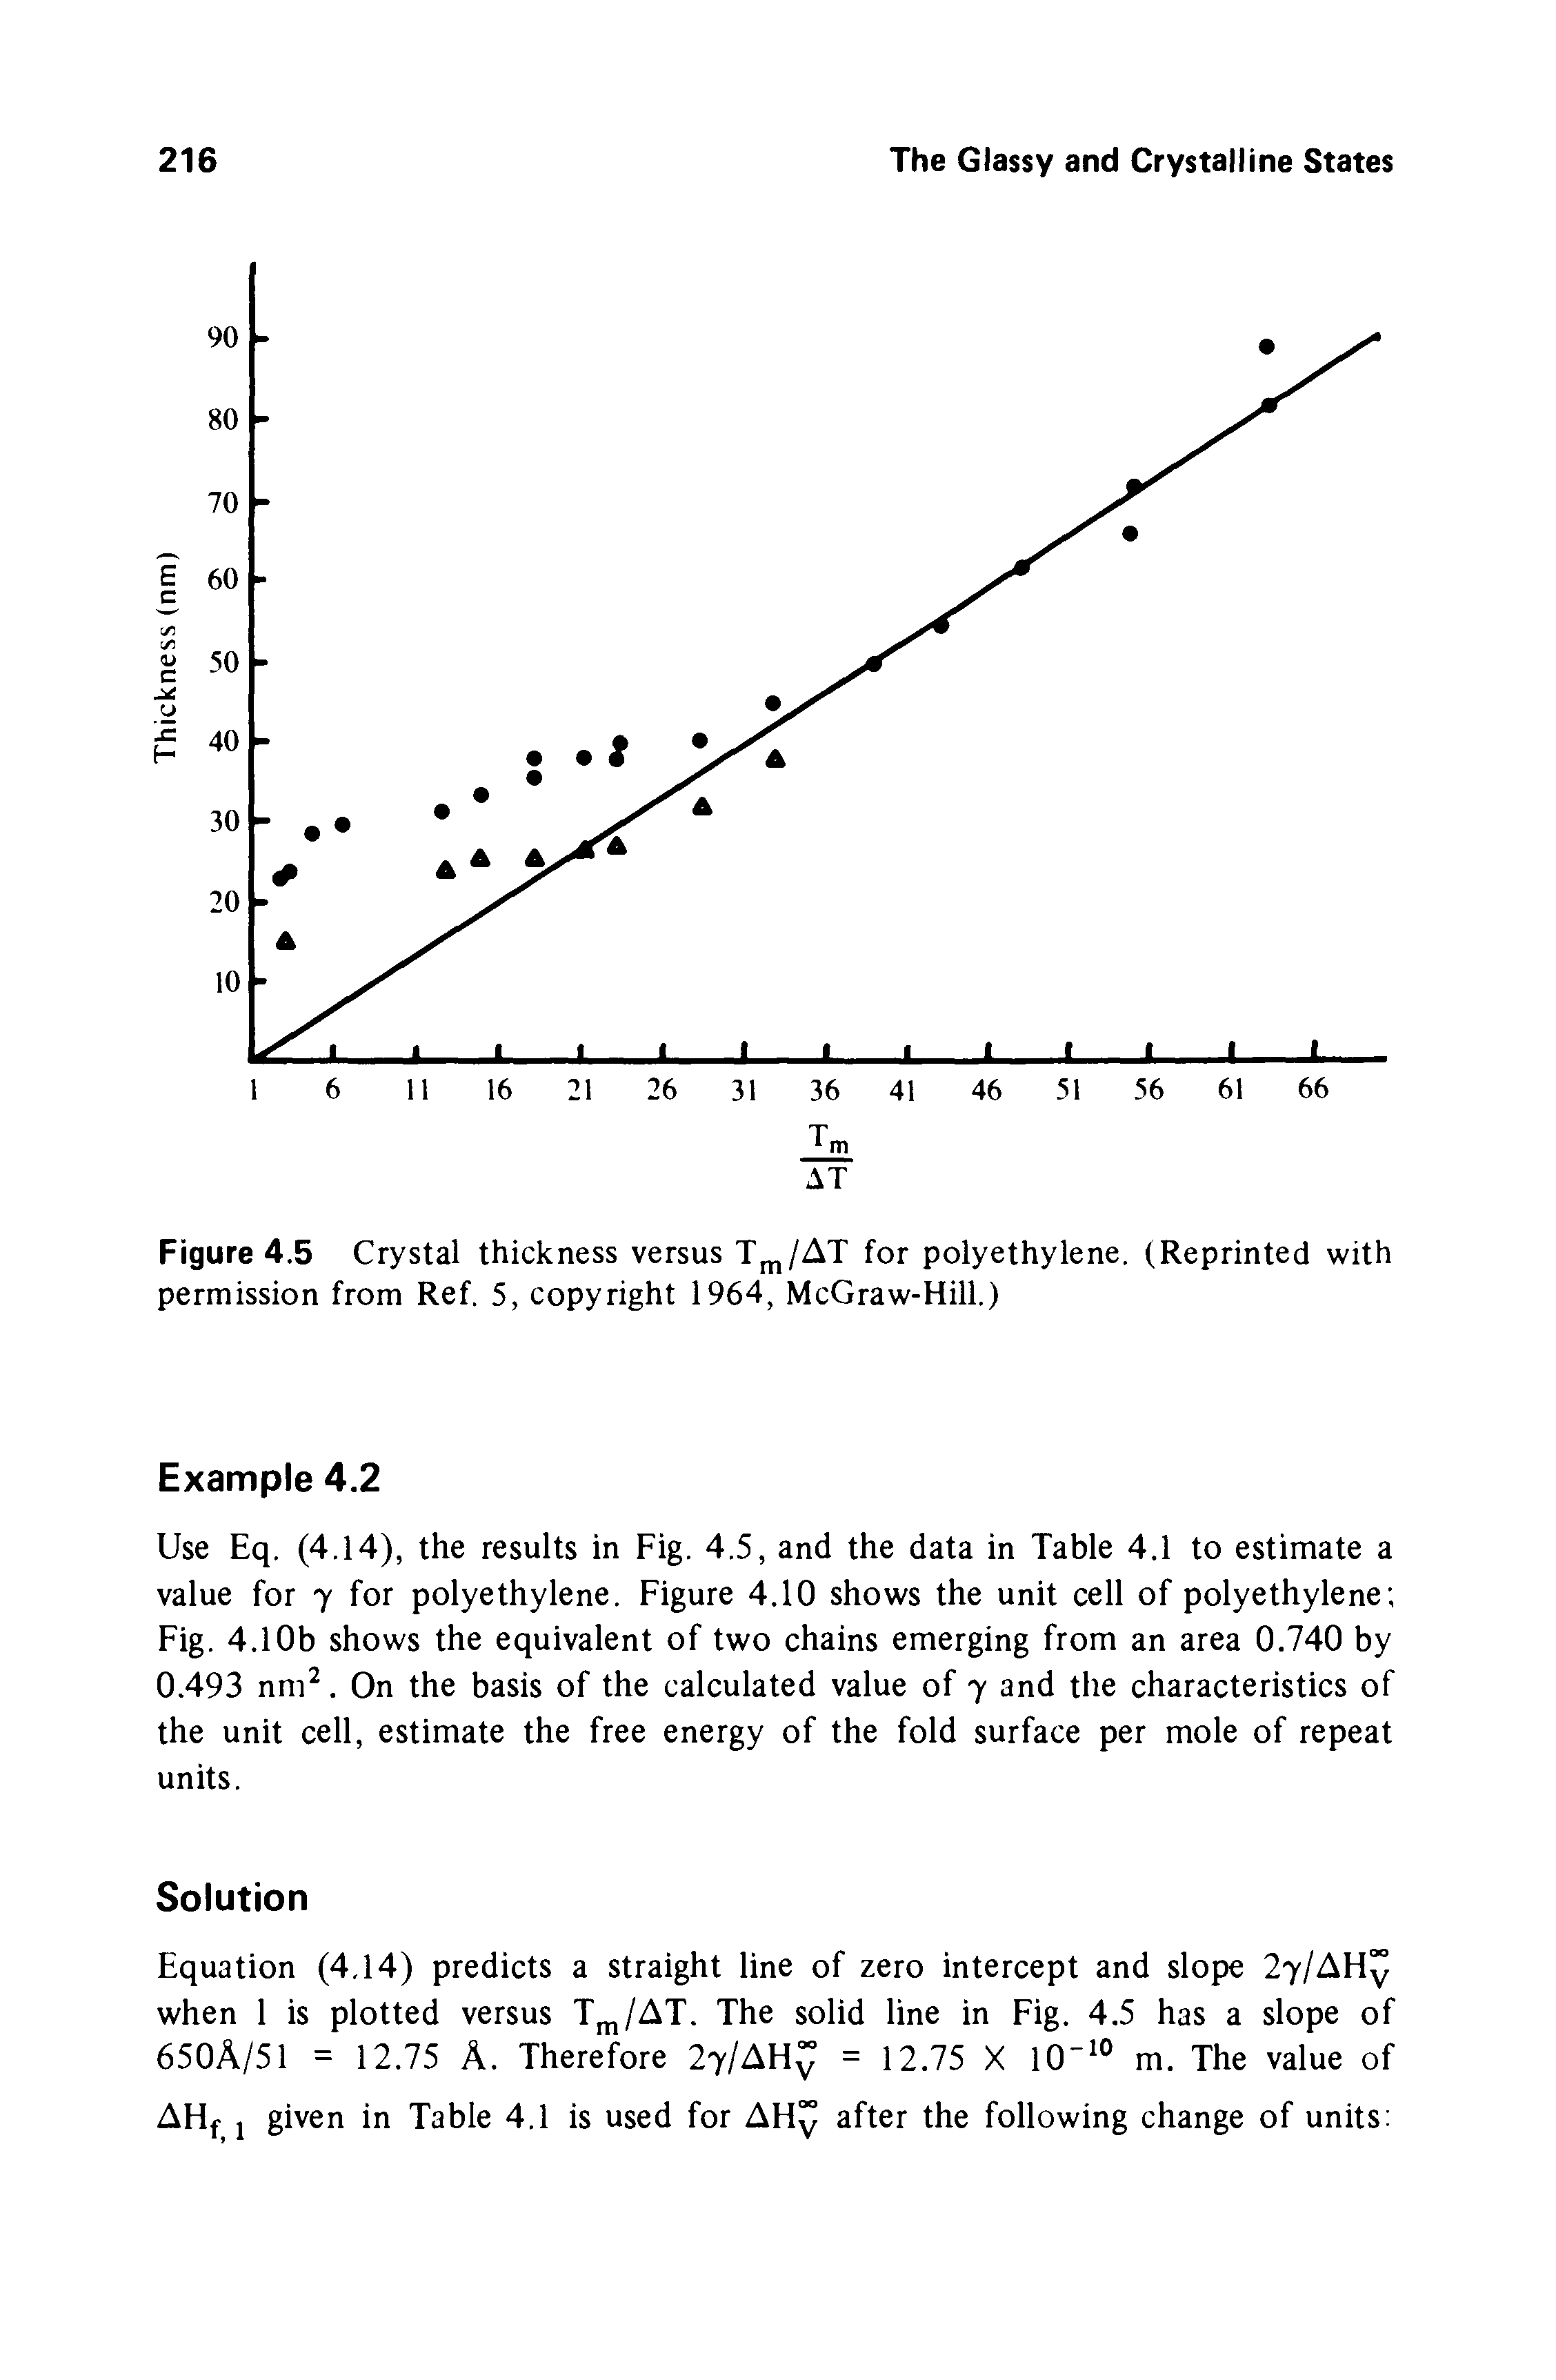 Figure 4.5 Crystal thickness versus Tjj,/AT for polyethylene. (Reprinted with permission from Ref. 5, copyright 1964, McGraw-Hill.)...